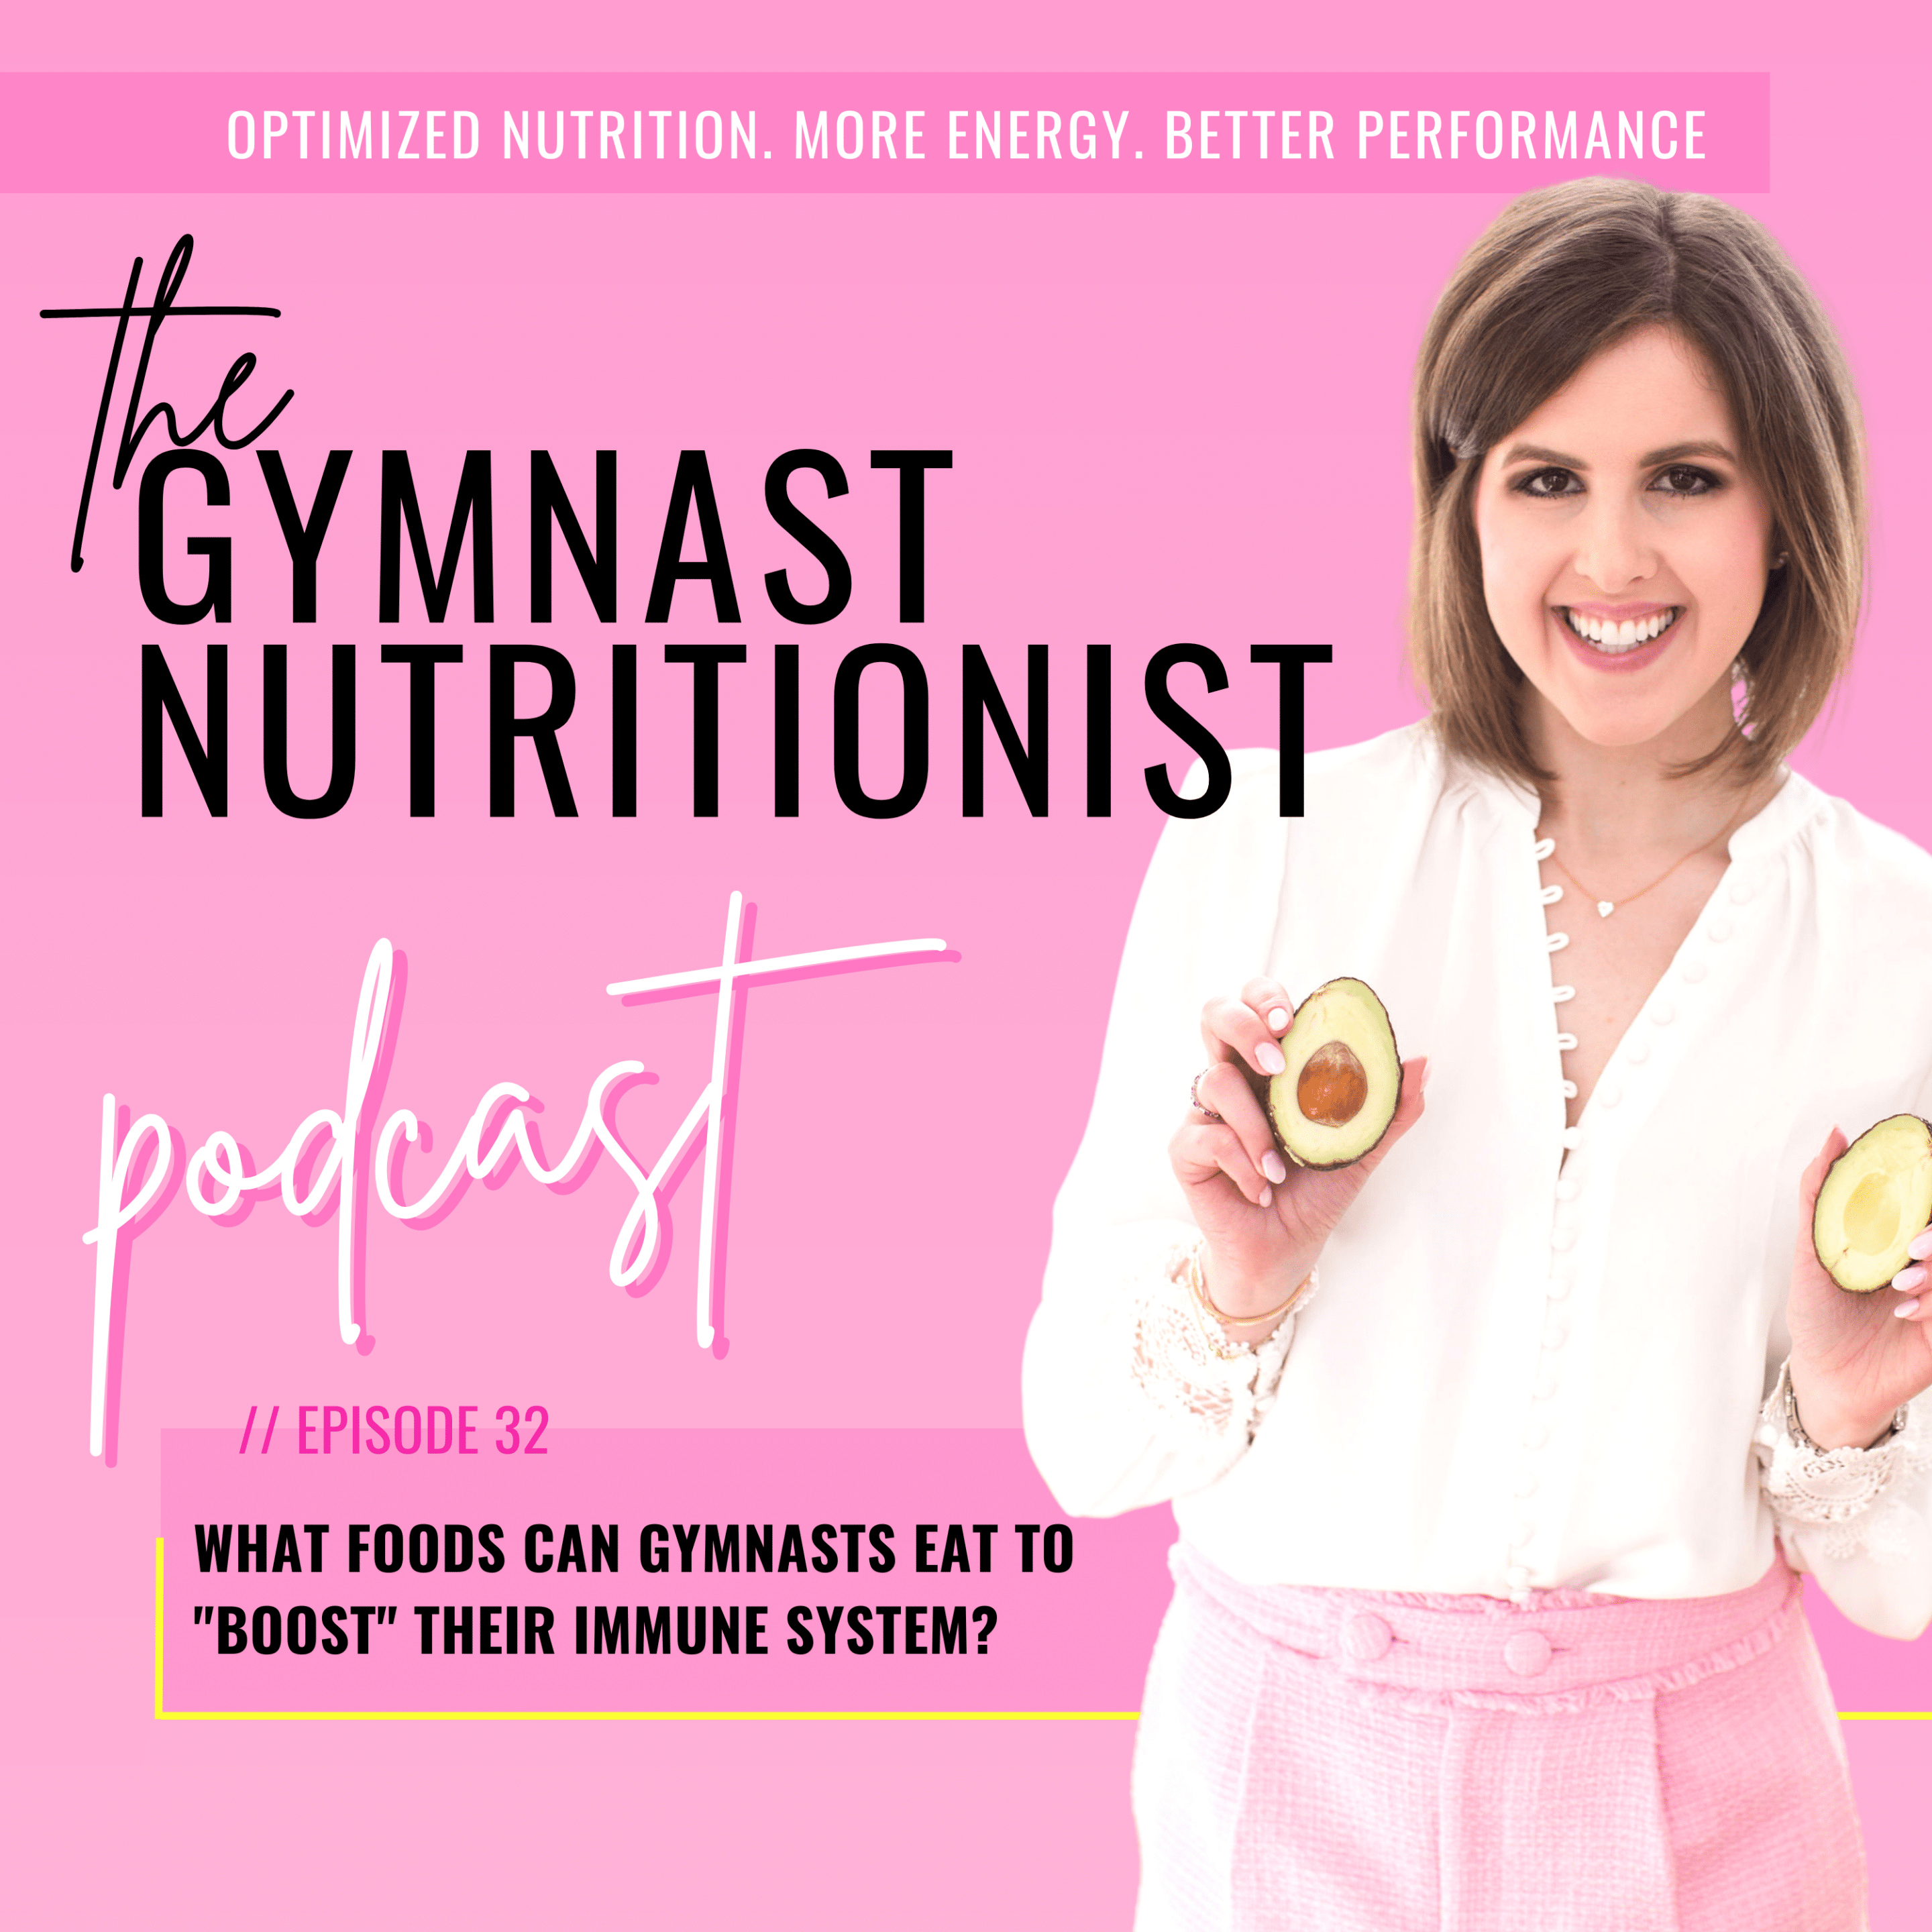 Episode 32: What foods can gymnasts eat to "boost" their immune system?